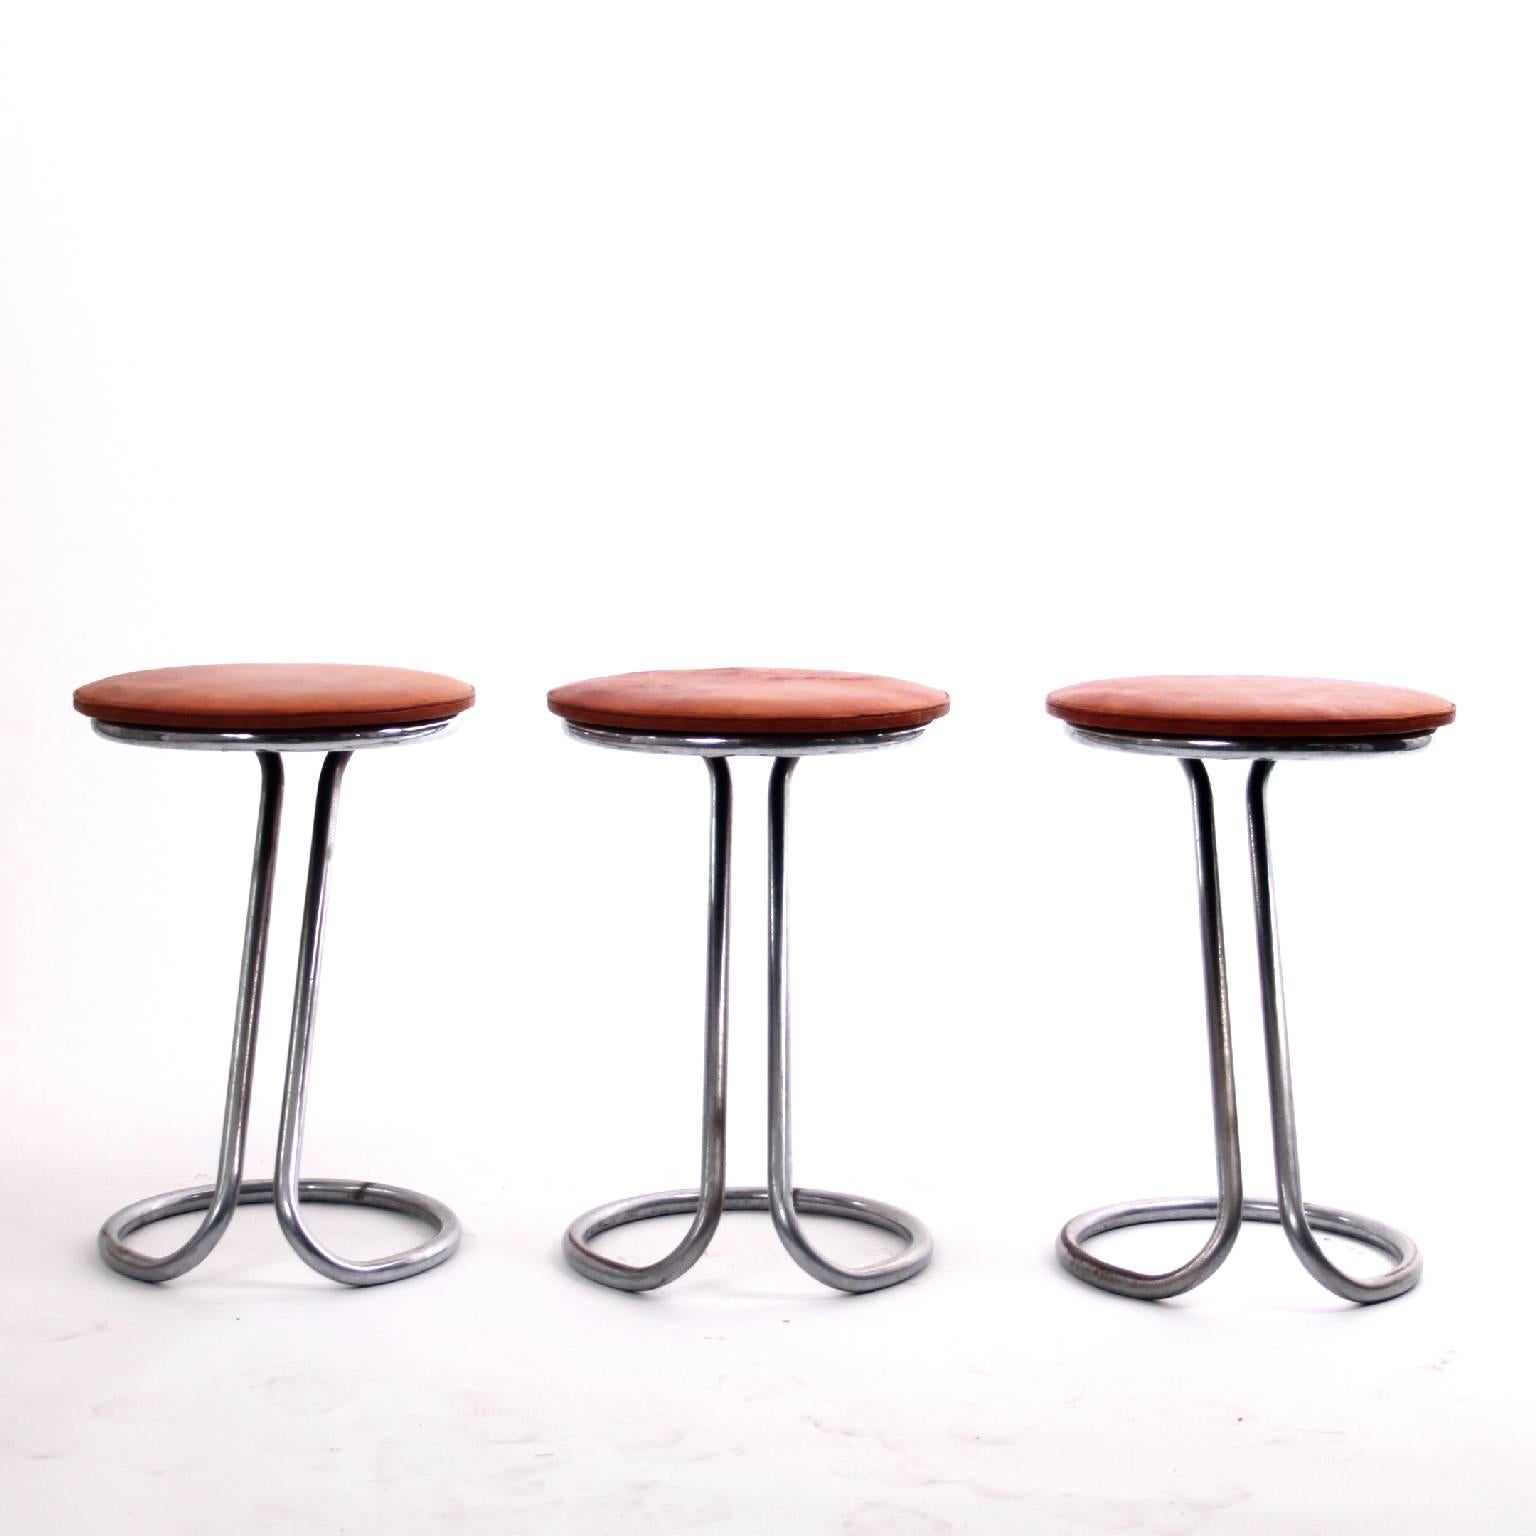 20th Century Rare Z-Stools by Gilbert Rohde with Leather Seats, 1933